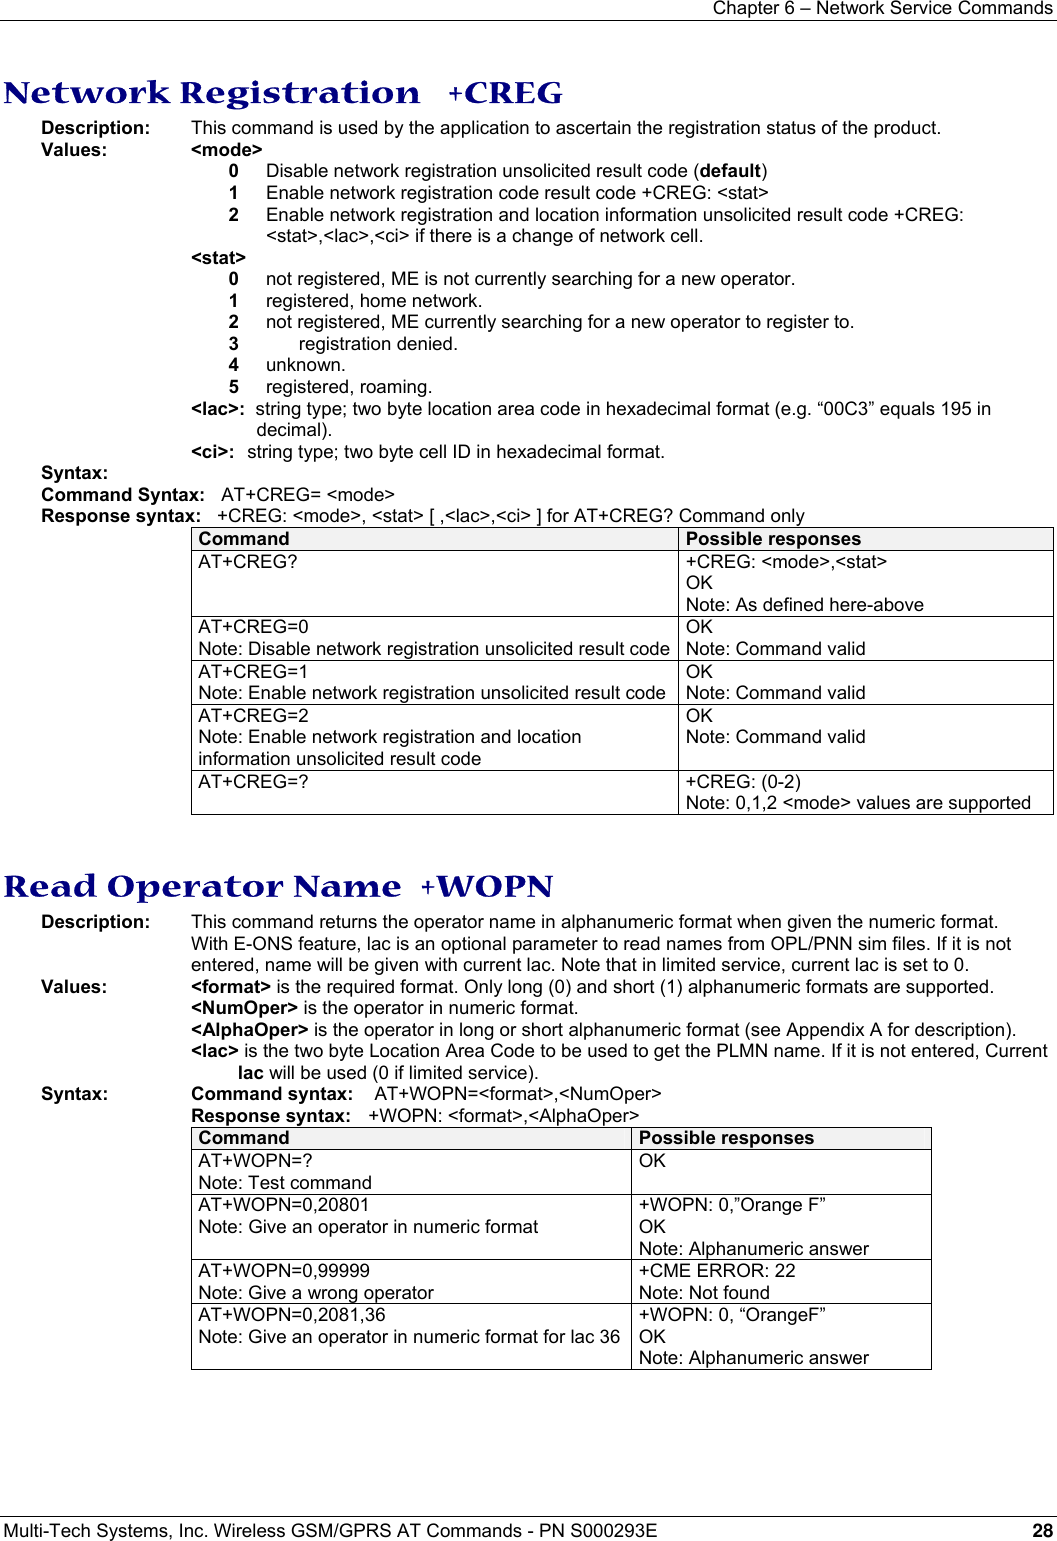 Chapter 6 – Network Service Commands   Multi-Tech Systems, Inc. Wireless GSM/GPRS AT Commands - PN S000293E 28  Network Registration   +CREG Description:  This command is used by the application to ascertain the registration status of the product. Values: &lt;mode&gt;  0  Disable network registration unsolicited result code (default) 1   Enable network registration code result code +CREG: &lt;stat&gt; 2   Enable network registration and location information unsolicited result code +CREG: &lt;stat&gt;,&lt;lac&gt;,&lt;ci&gt; if there is a change of network cell. &lt;stat&gt;  0   not registered, ME is not currently searching for a new operator. 1   registered, home network. 2   not registered, ME currently searching for a new operator to register to. 3   registration denied. 4   unknown. 5   registered, roaming. &lt;lac&gt;:  string type; two byte location area code in hexadecimal format (e.g. “00C3” equals 195 in decimal). &lt;ci&gt;:  string type; two byte cell ID in hexadecimal format. Syntax:  Command Syntax:   AT+CREG= &lt;mode&gt; Response syntax:   +CREG: &lt;mode&gt;, &lt;stat&gt; [ ,&lt;lac&gt;,&lt;ci&gt; ] for AT+CREG? Command only Command  Possible responses AT+CREG?  +CREG: &lt;mode&gt;,&lt;stat&gt; OK Note: As defined here-above AT+CREG=0 Note: Disable network registration unsolicited result codeOK Note: Command valid AT+CREG=1 Note: Enable network registration unsolicited result code OK Note: Command valid AT+CREG=2 Note: Enable network registration and location information unsolicited result code OK Note: Command valid AT+CREG=? +CREG: (0-2) Note: 0,1,2 &lt;mode&gt; values are supported   Read Operator Name  +WOPN Description:  This command returns the operator name in alphanumeric format when given the numeric format.   With E-ONS feature, lac is an optional parameter to read names from OPL/PNN sim files. If it is not entered, name will be given with current lac. Note that in limited service, current lac is set to 0. Values:    &lt;format&gt; is the required format. Only long (0) and short (1) alphanumeric formats are supported.  &lt;NumOper&gt; is the operator in numeric format.  &lt;AlphaOper&gt; is the operator in long or short alphanumeric format (see Appendix A for description).  &lt;lac&gt; is the two byte Location Area Code to be used to get the PLMN name. If it is not entered, Current   lac will be used (0 if limited service). Syntax: Command syntax:    AT+WOPN=&lt;format&gt;,&lt;NumOper&gt;  Response syntax:   +WOPN: &lt;format&gt;,&lt;AlphaOper&gt; Command  Possible responses AT+WOPN=? Note: Test command OK   AT+WOPN=0,20801 Note: Give an operator in numeric format +WOPN: 0,”Orange F” OK Note: Alphanumeric answer AT+WOPN=0,99999 Note: Give a wrong operator +CME ERROR: 22 Note: Not found AT+WOPN=0,2081,36 Note: Give an operator in numeric format for lac 36 +WOPN: 0, “OrangeF” OK Note: Alphanumeric answer  